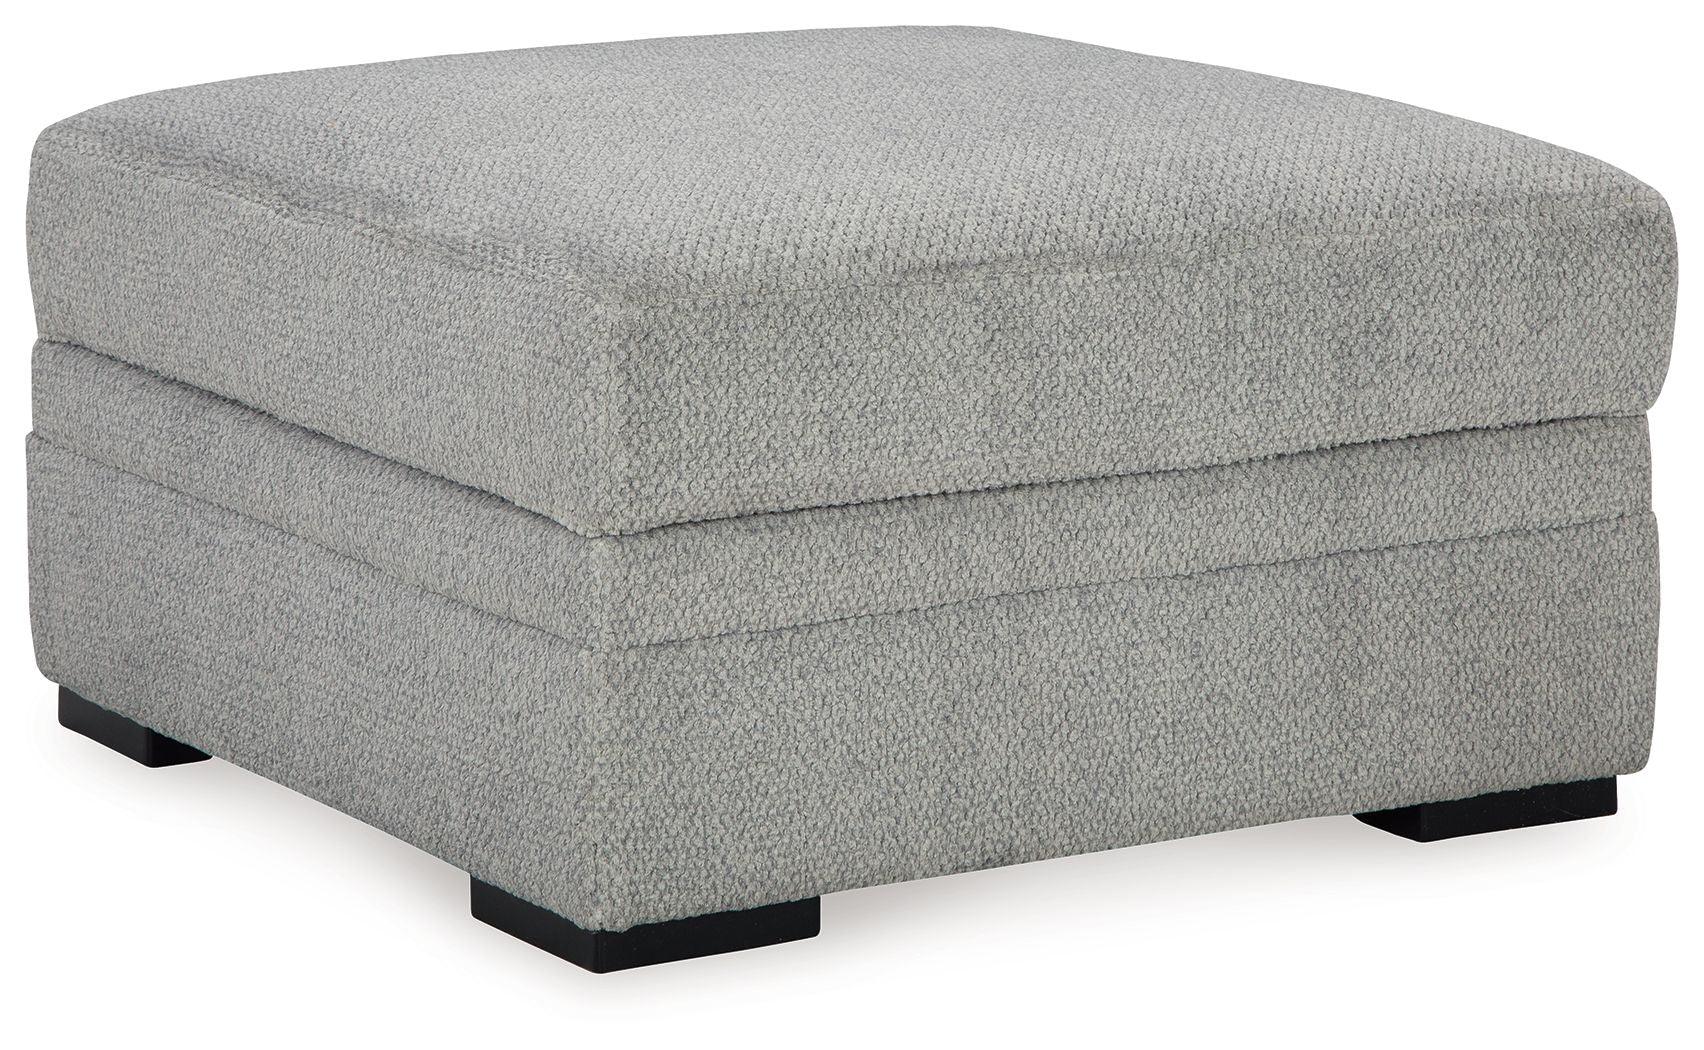 Signature Design by Ashley® - Casselbury - Cement - Ottoman With Storage - 5th Avenue Furniture